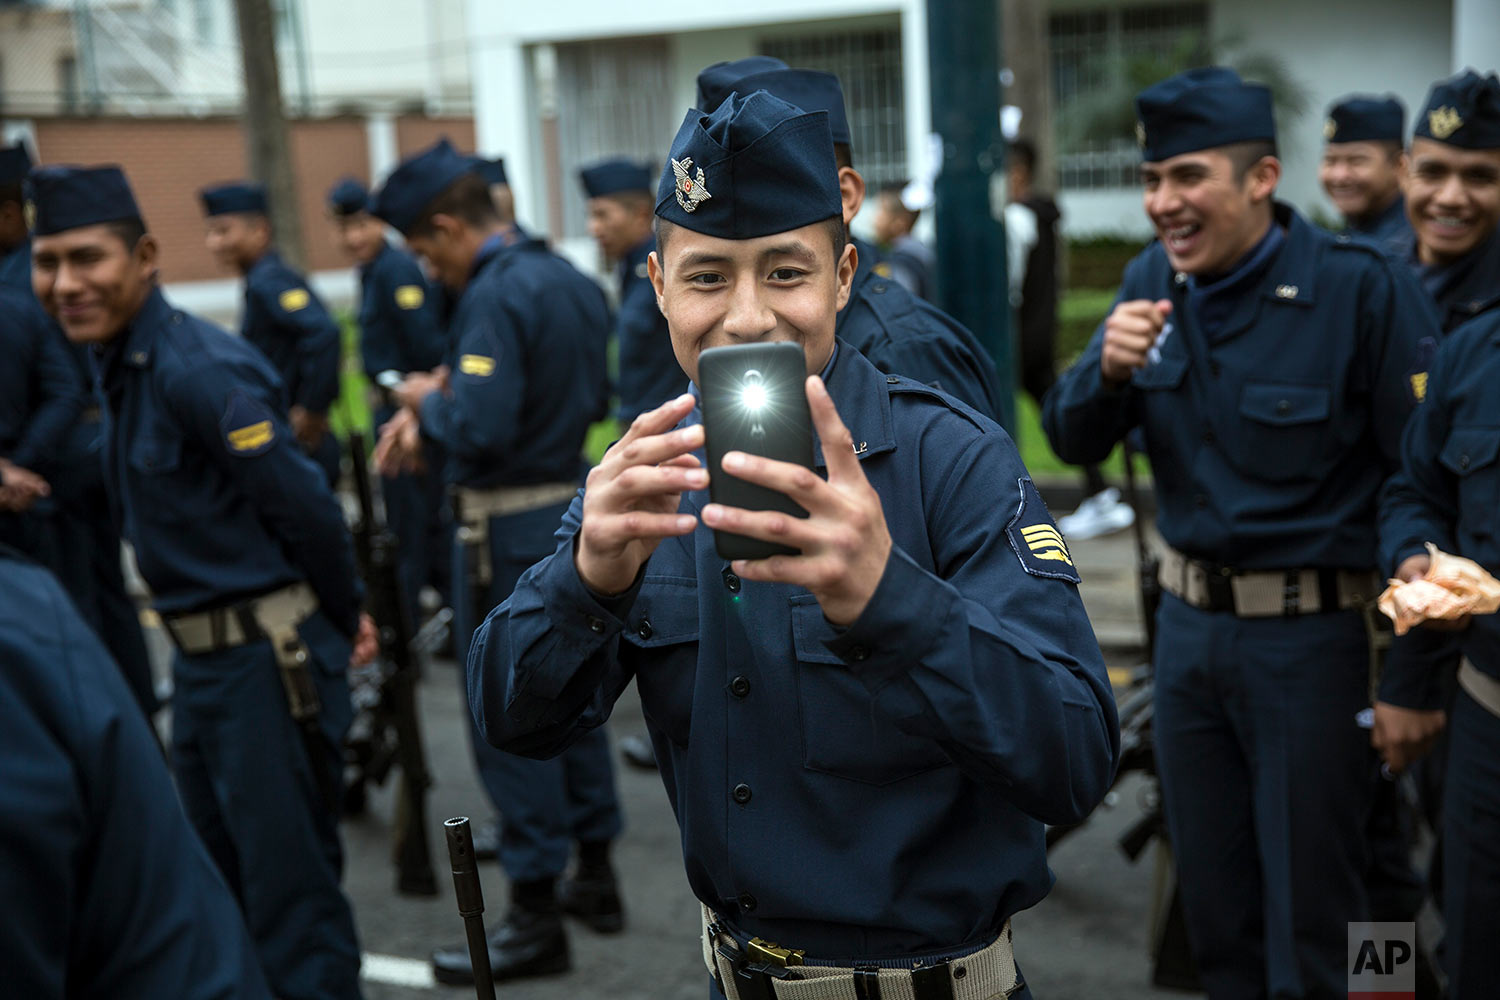  A soldier takes a cell phone picture of journalists before the start of a military parade, part of Independence Day celebrations in Lima, Peru, July 29, 2018. (AP Photo/Rodrigo Abd) 